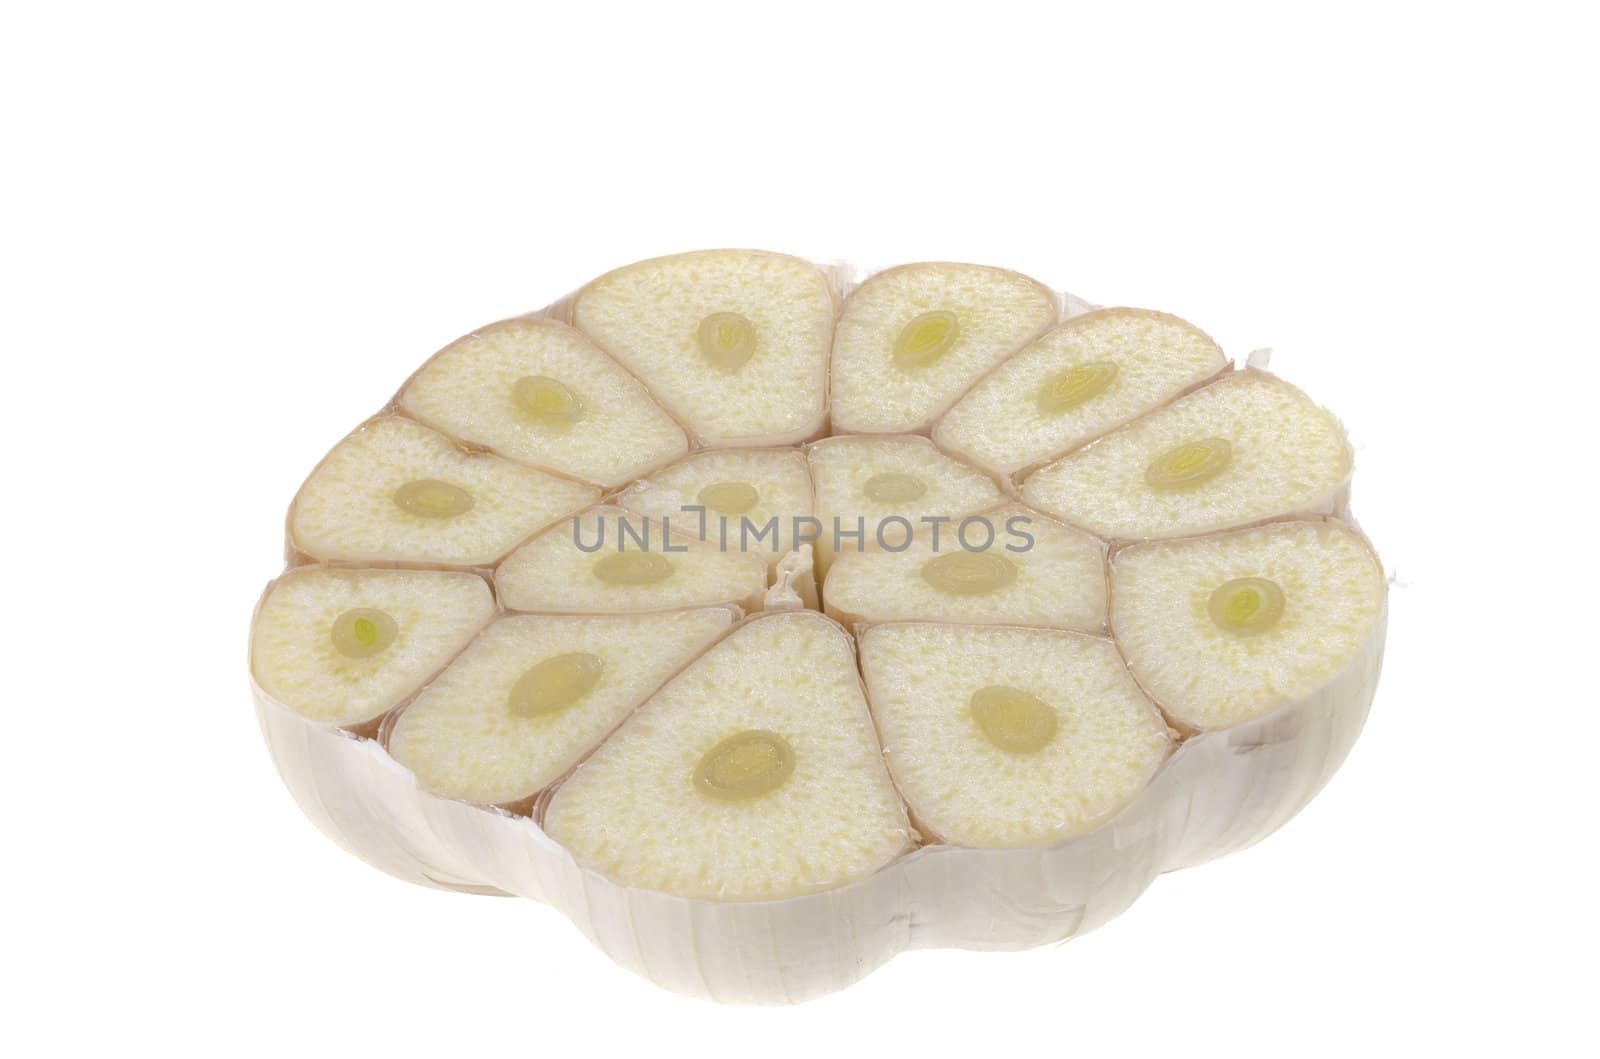 Garlic cut into half with the separate cloves showing - isolated on white